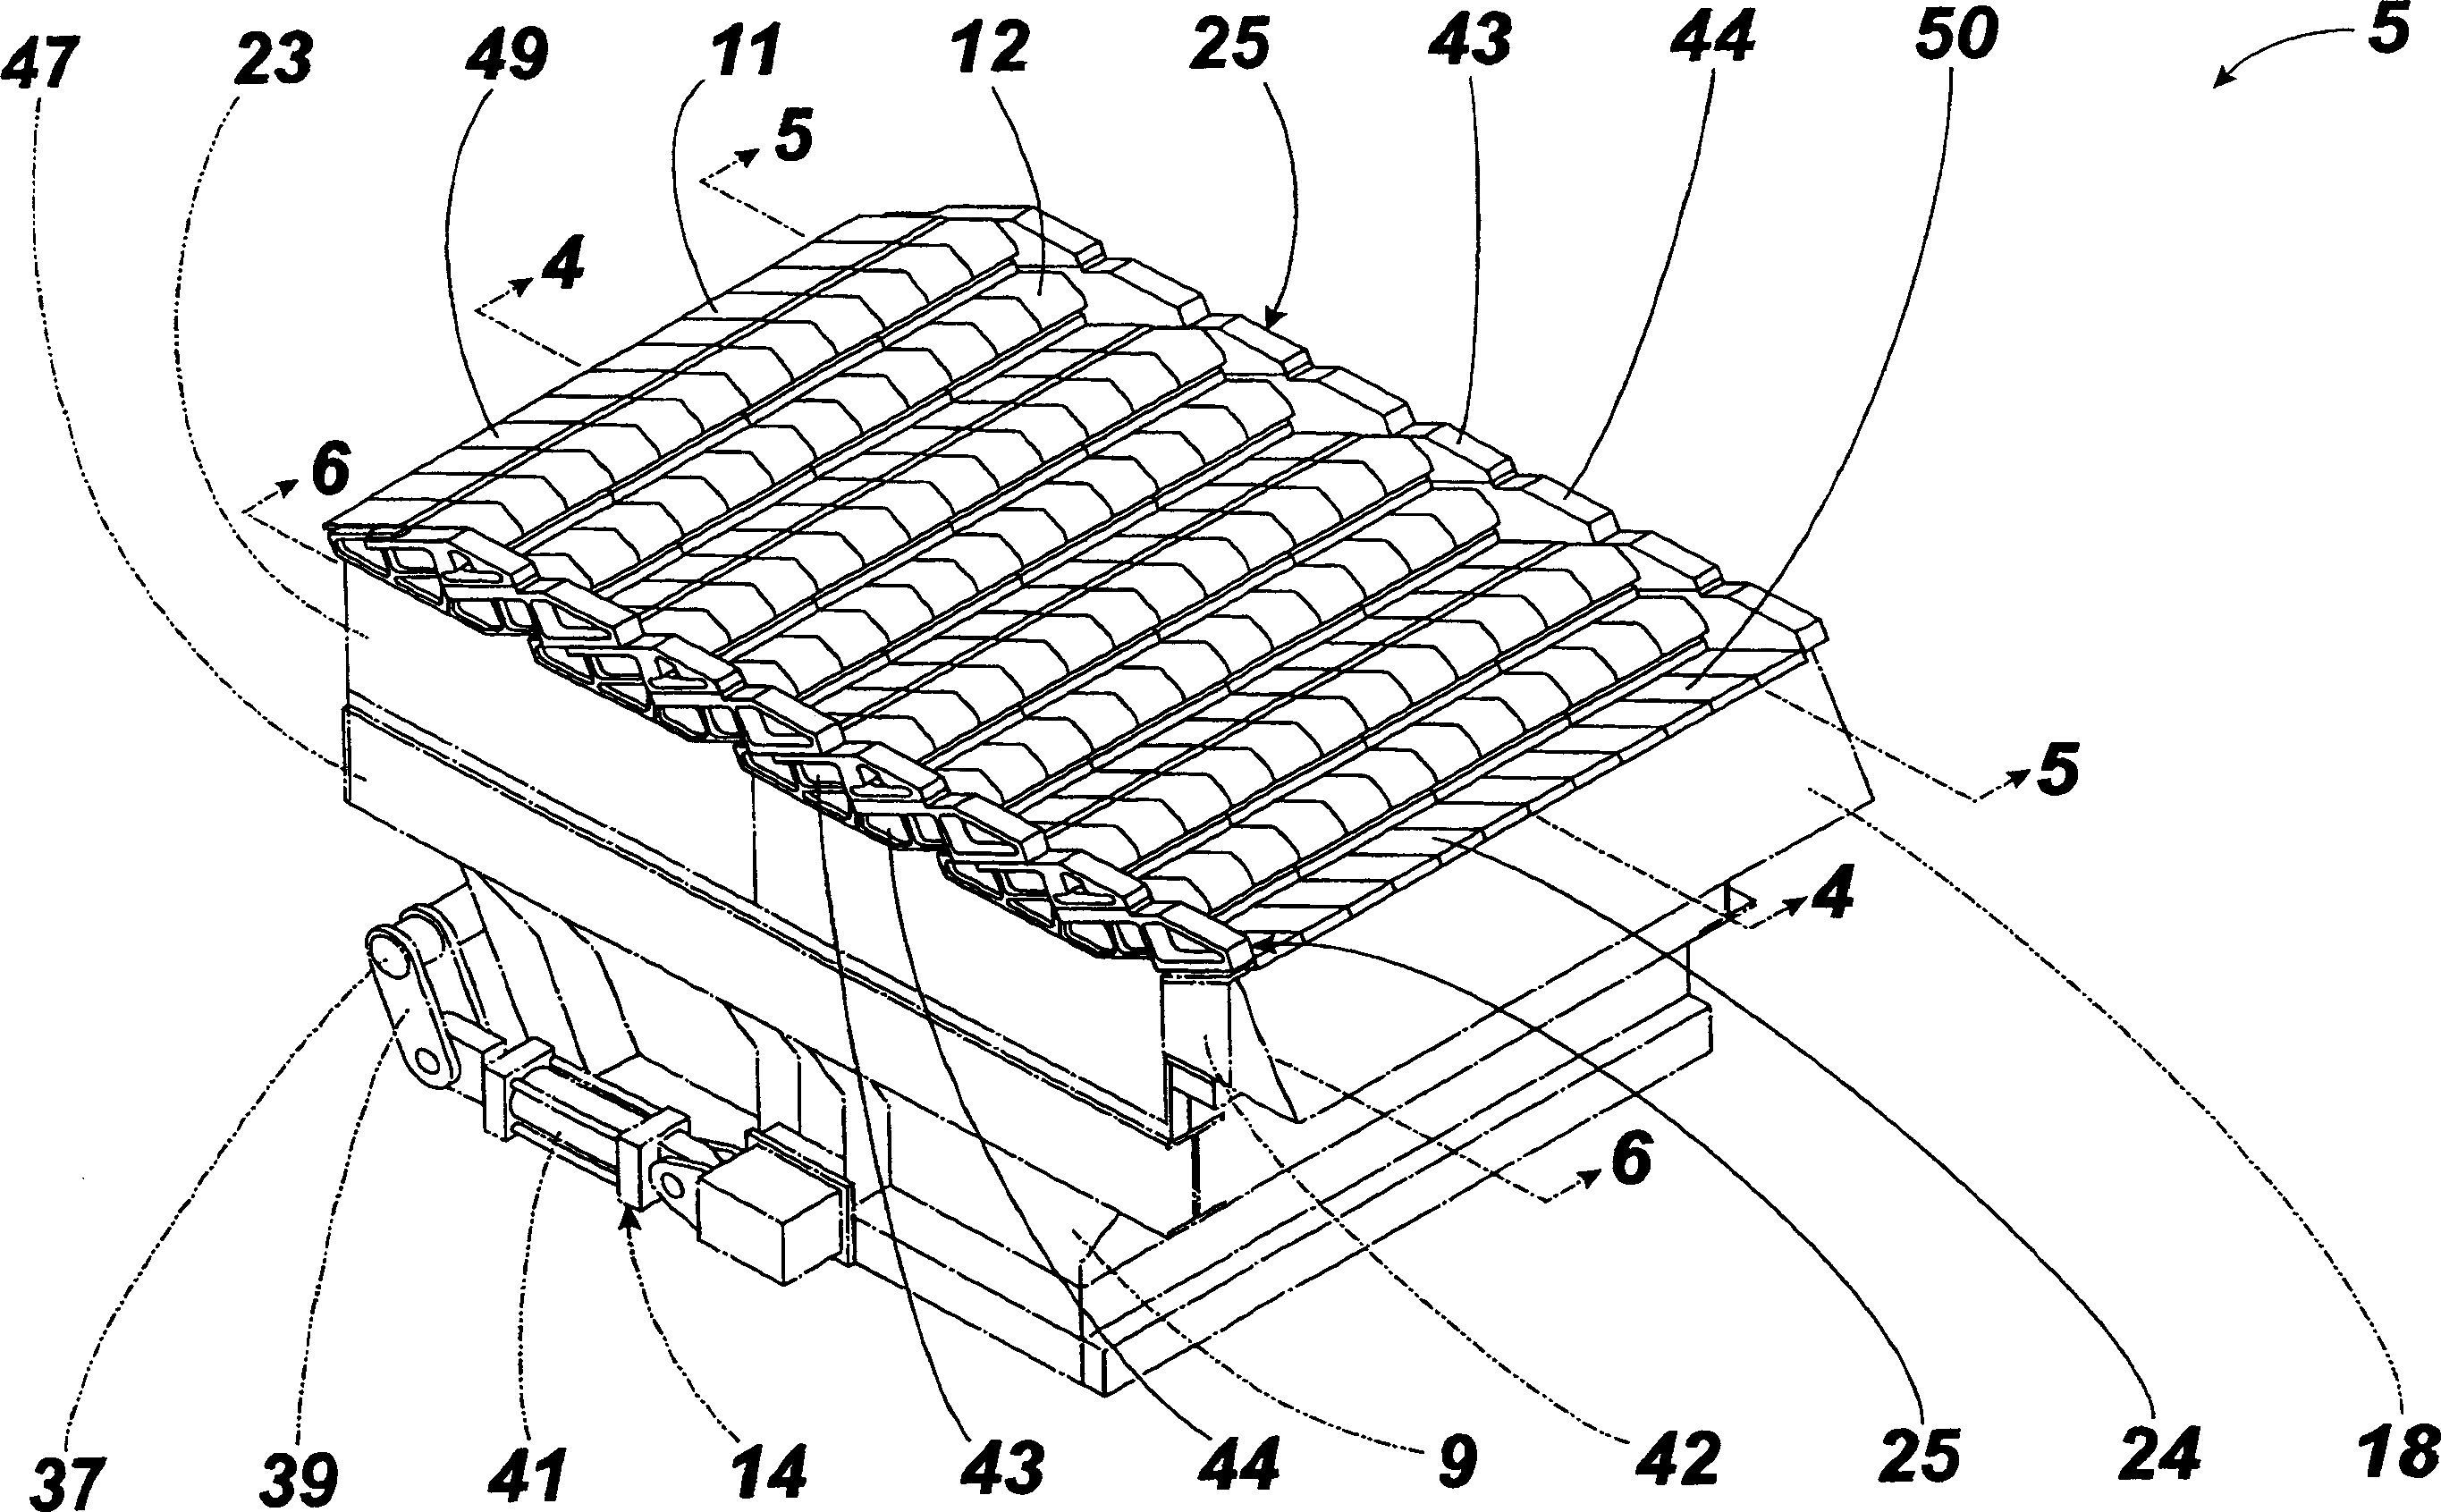 Step motor-driven grate burniag device of garbage furnace